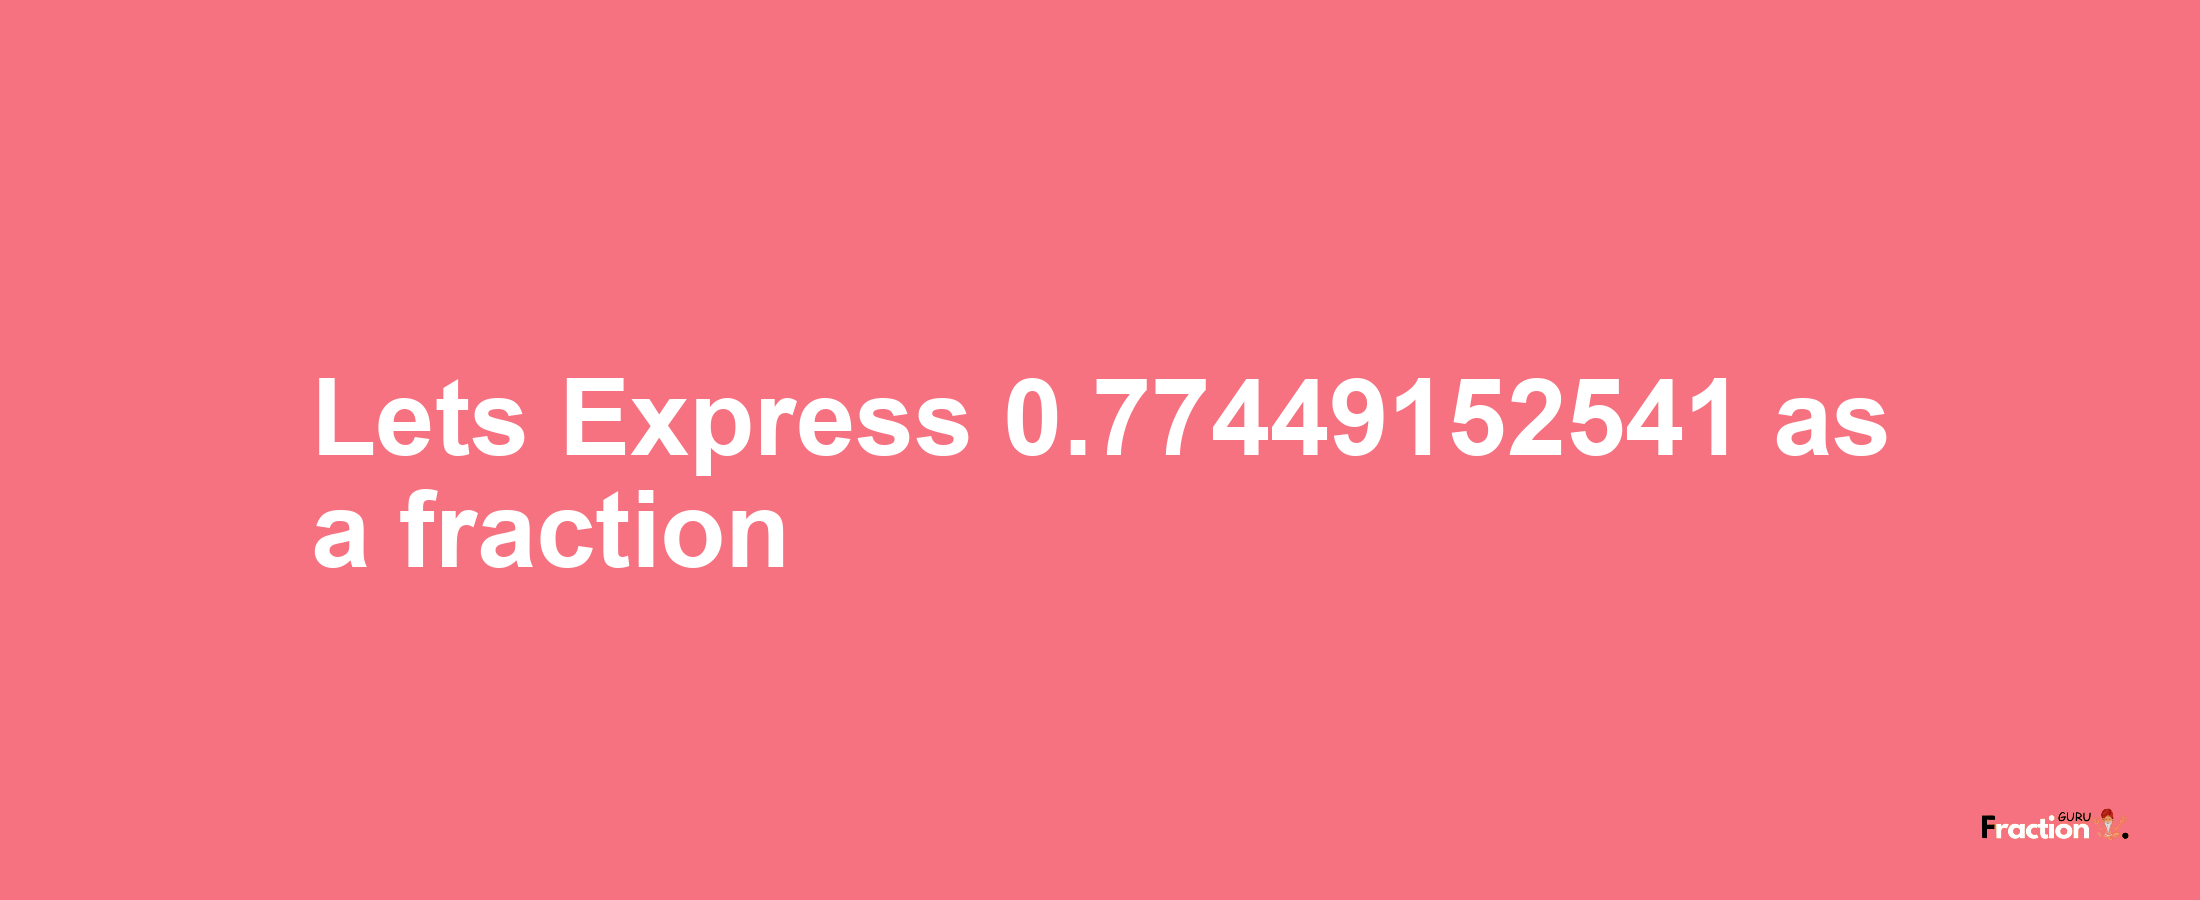 Lets Express 0.77449152541 as afraction